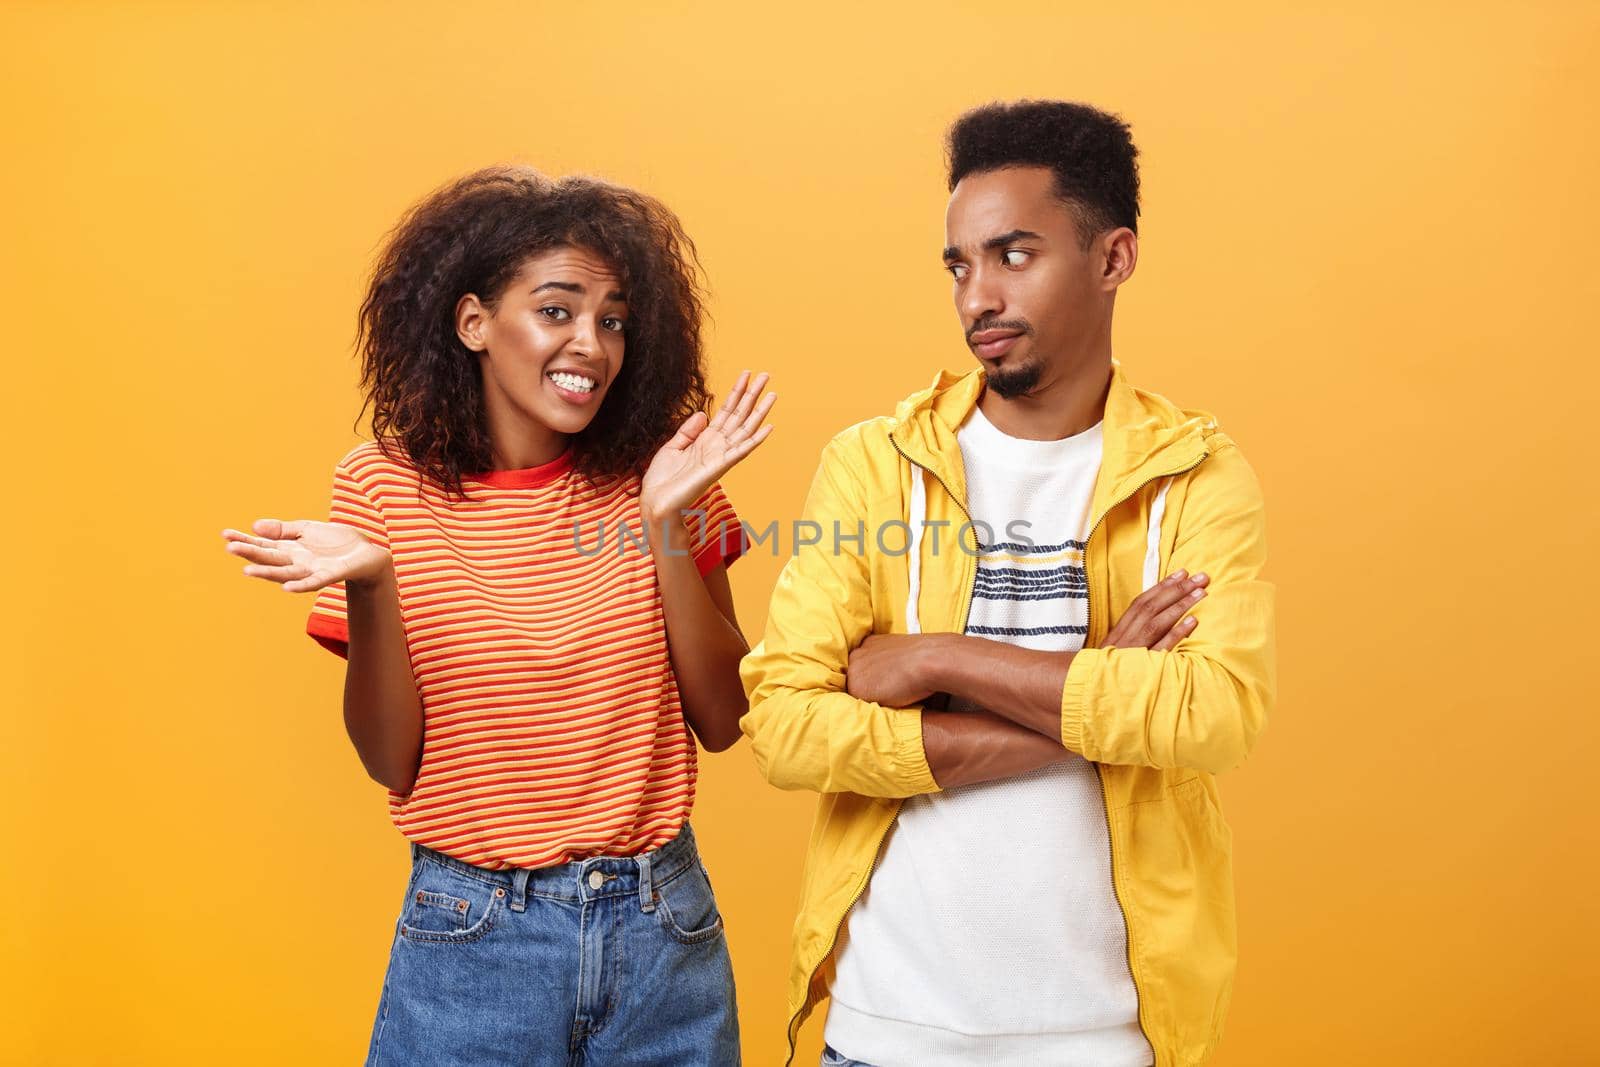 Guy thinks his friend weirdo making dumb thinks looking at cute girl with suspicious look crossing arms on chest raising eyebrow questioned while girlfriend saying sorry shrugging over orange wall by Benzoix